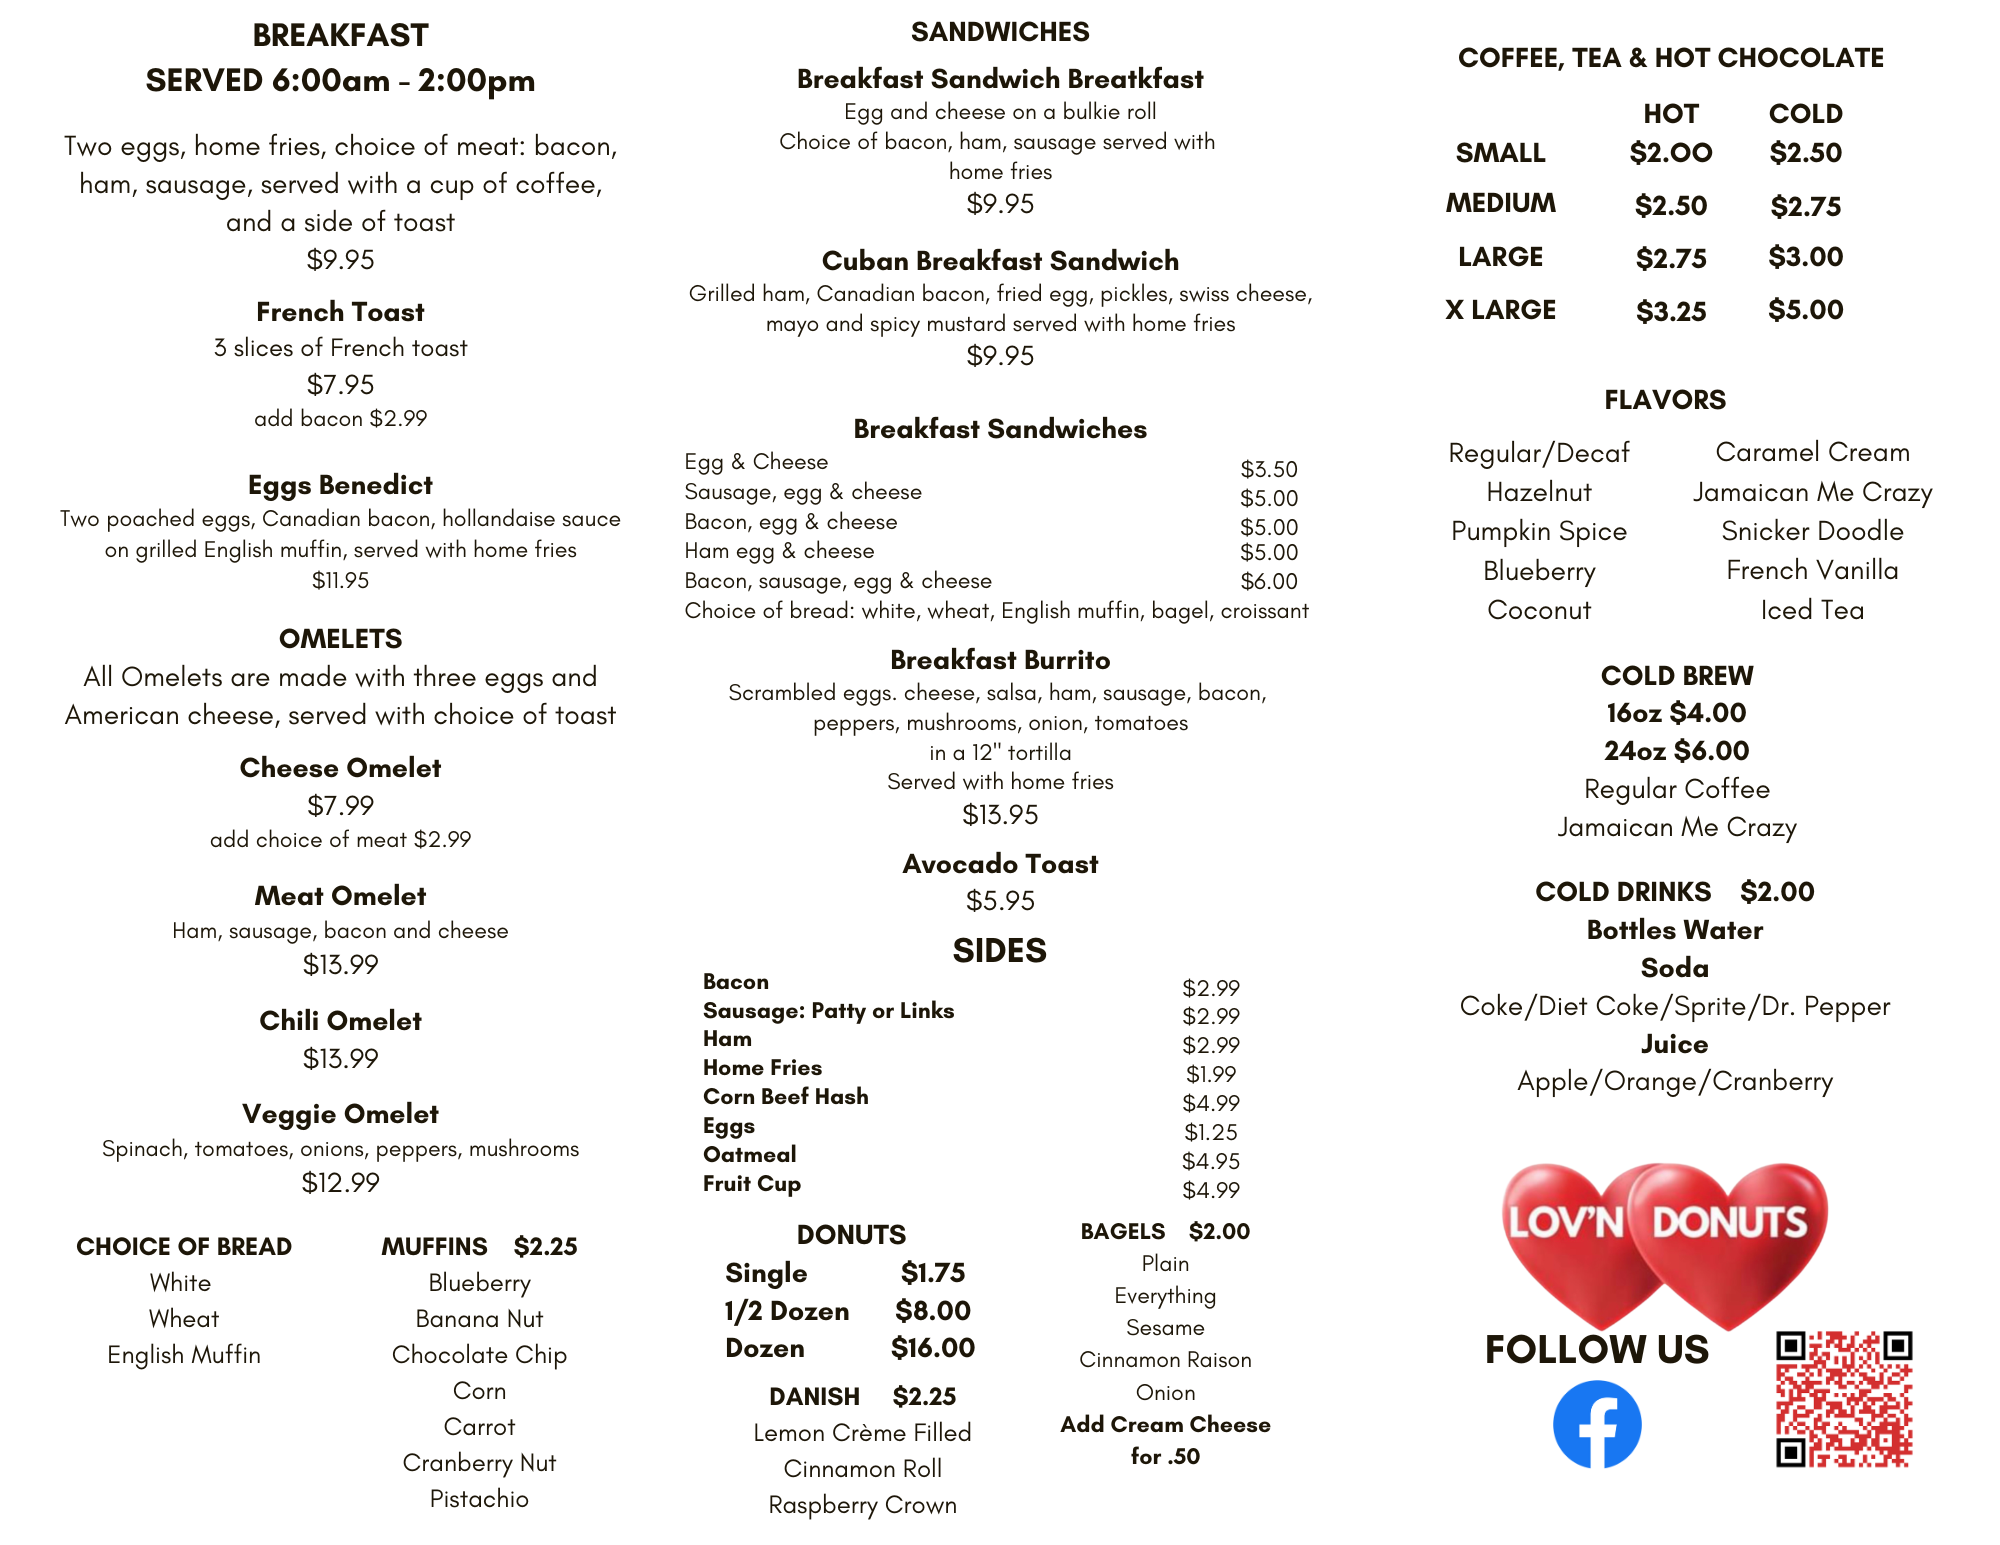 Lov'n Donuts 745 Central St, Leominster, MA 01453